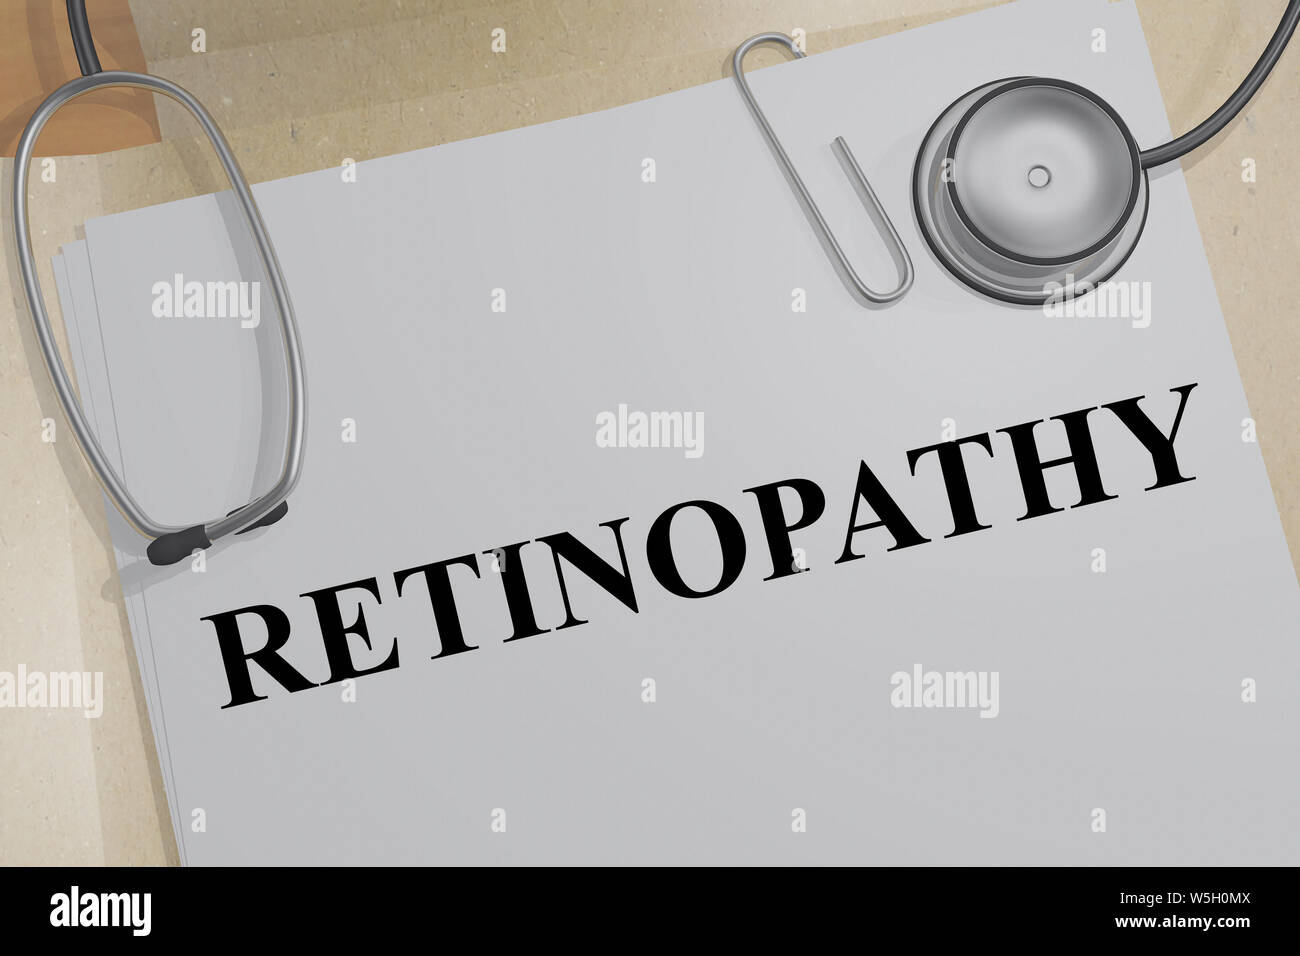 3D illustration of RETINOPATHY title on a medical document Stock Photo